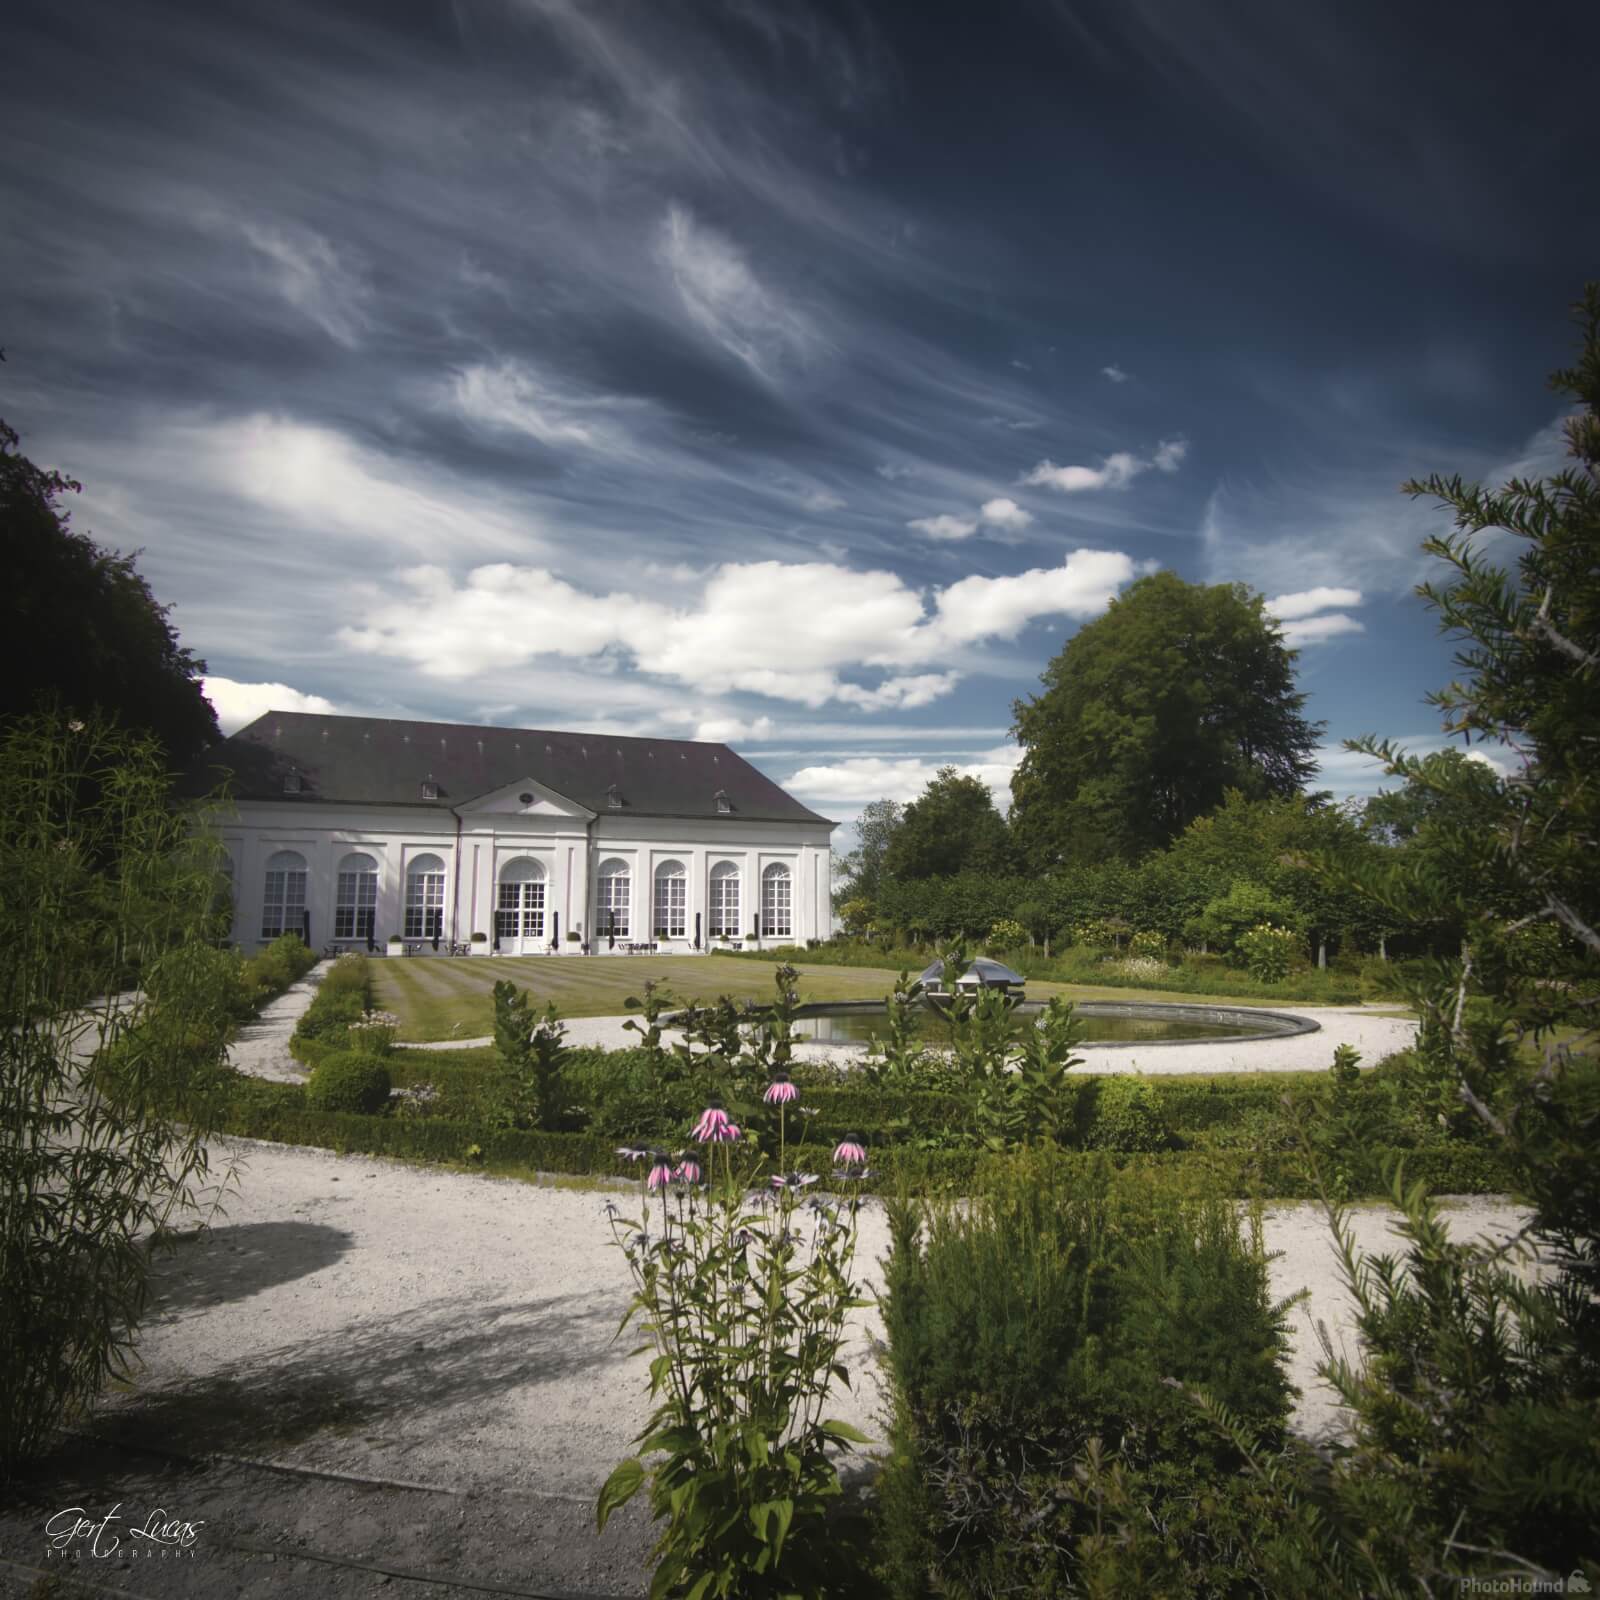 Image of Seneffe Castle and Gardens by Gert Lucas